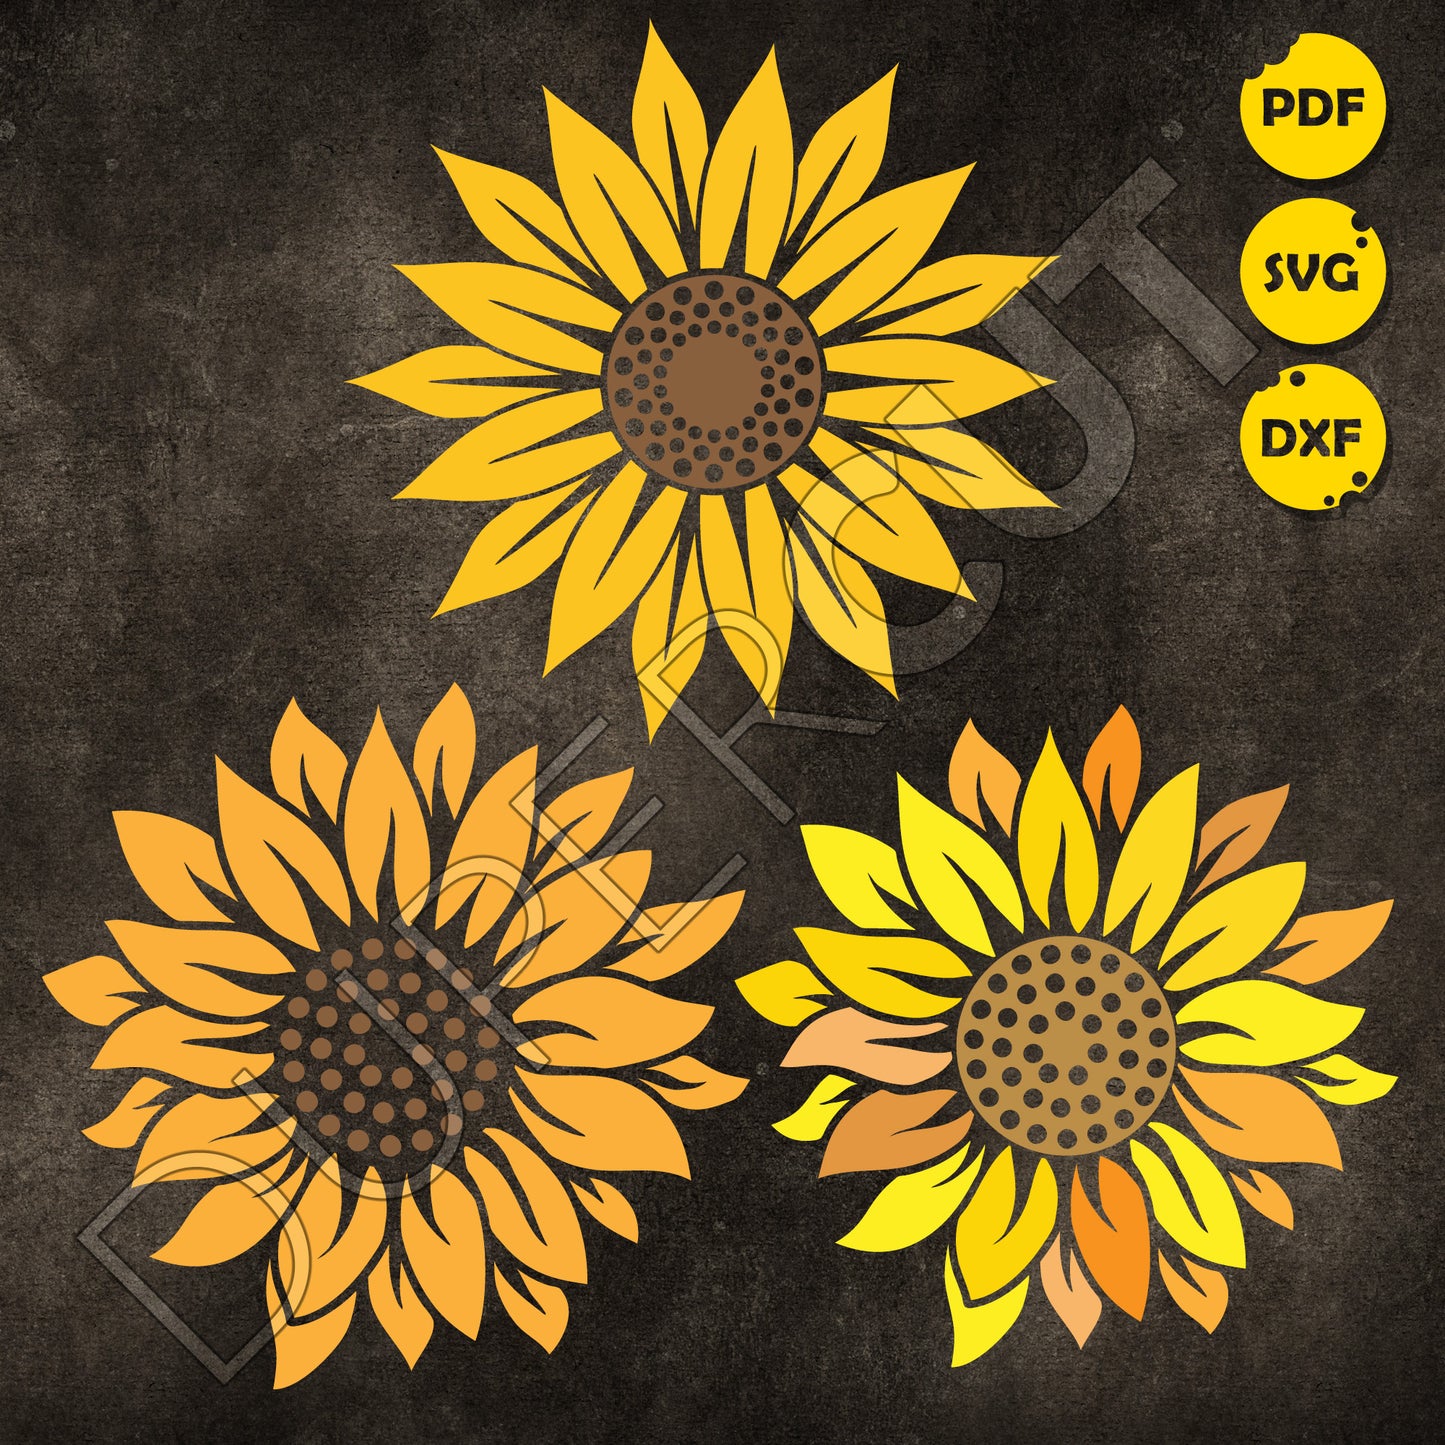 SVG PNG DXF sunflowers for tumblers - paper cutting template, print on demand files, for Cricut, Grlowforge, Silhouette